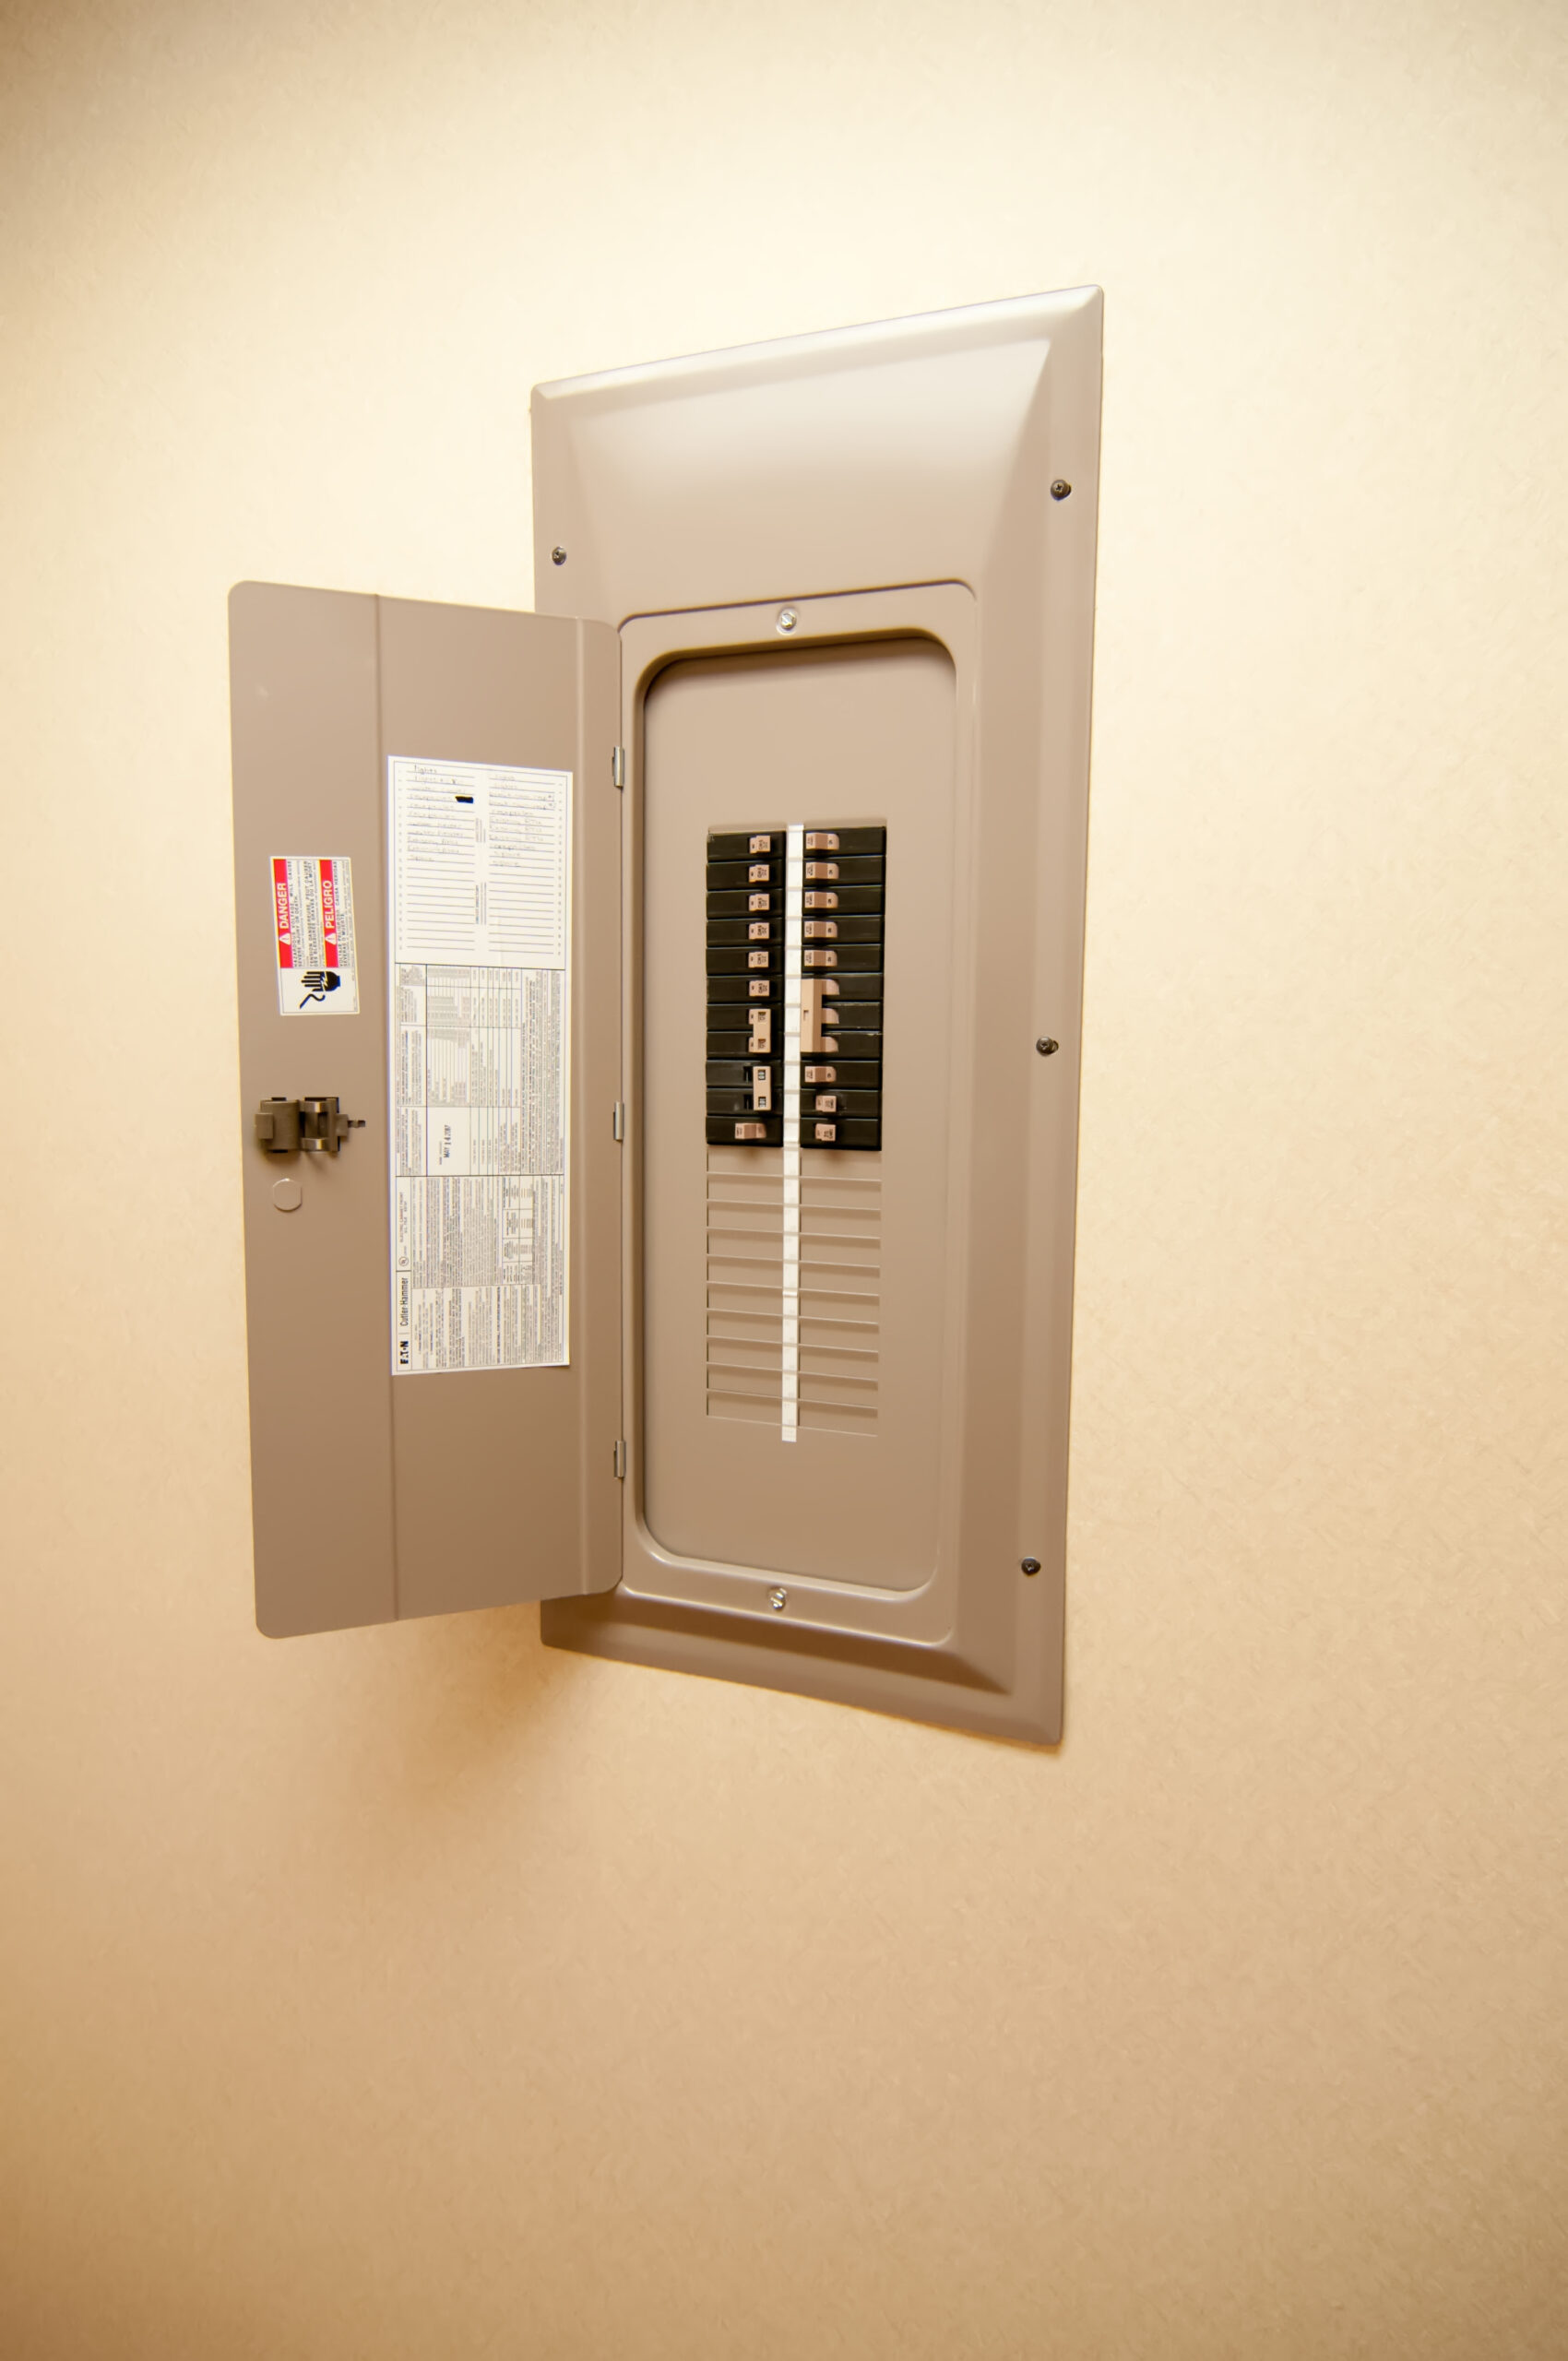 HOW TO RESET YOUR CIRCUIT BREAKERS